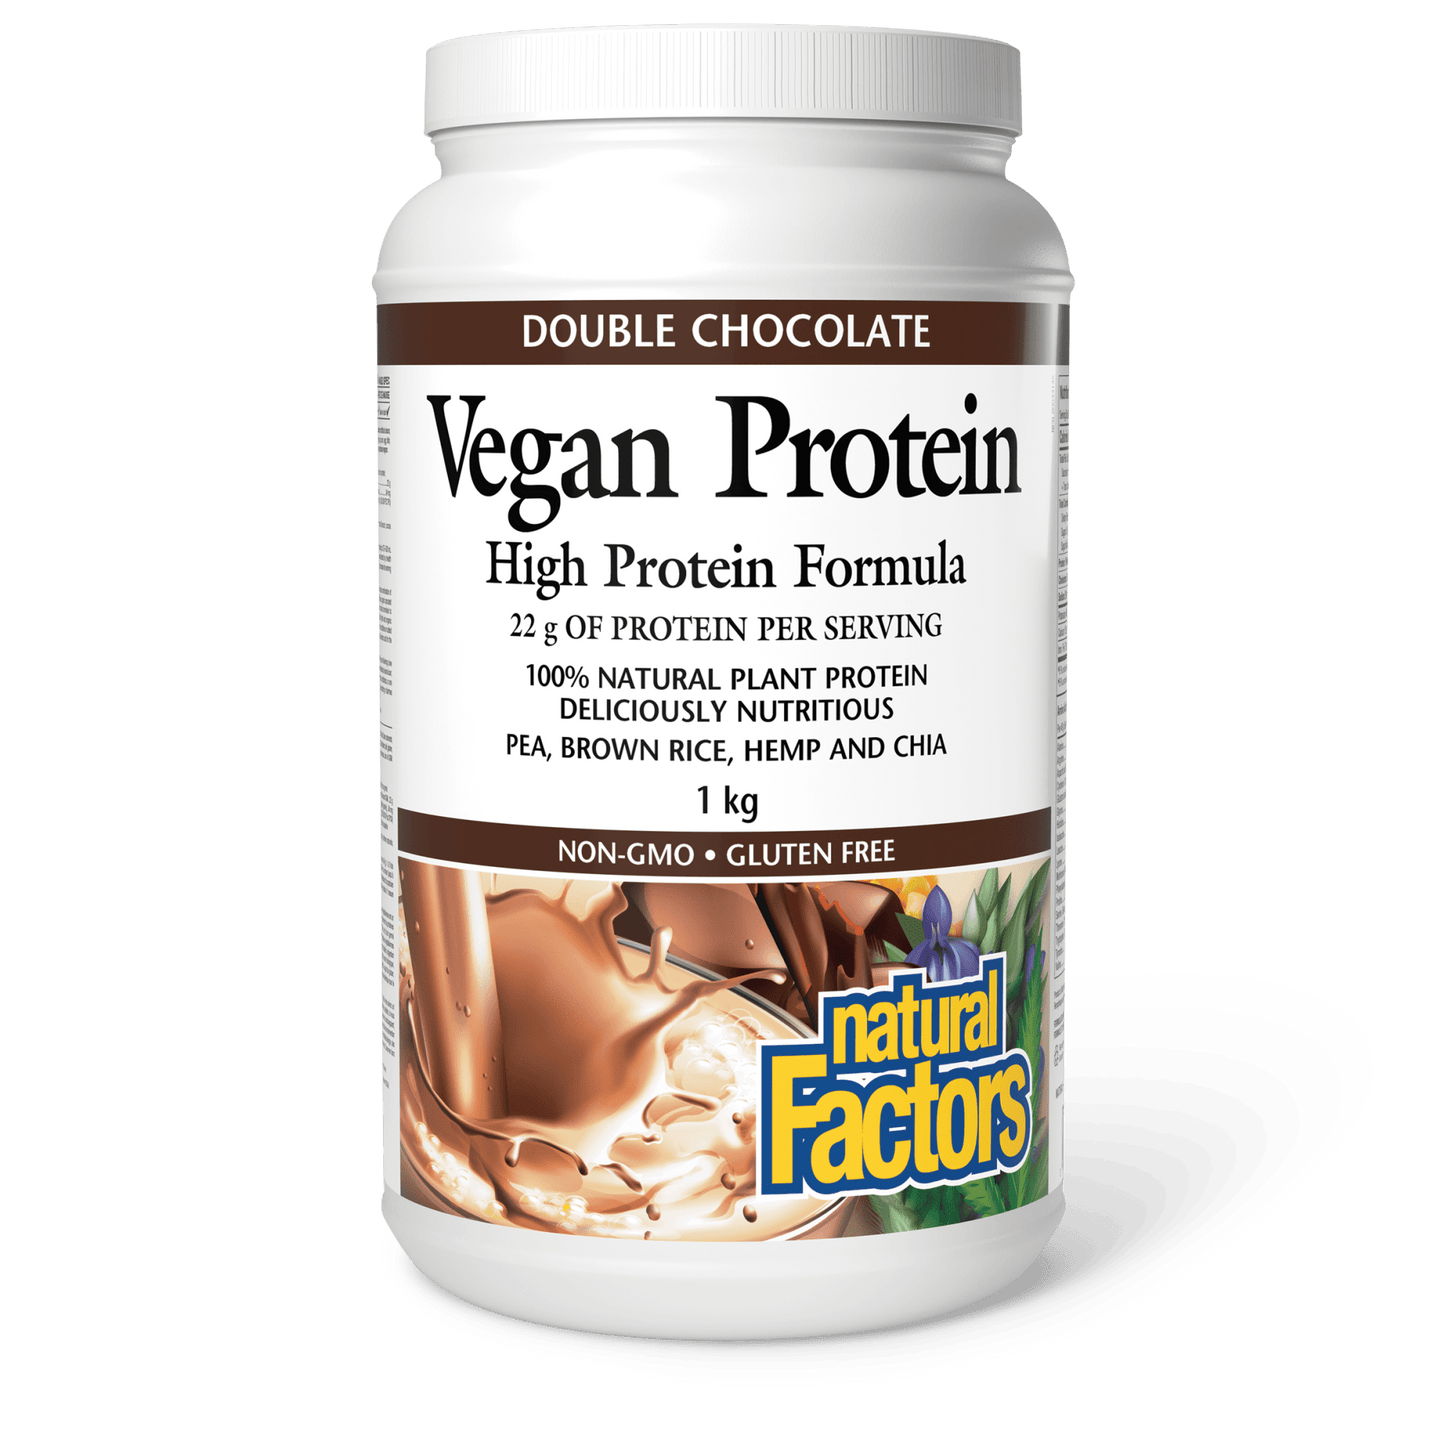 Vegan Protein High Protein Formula, Double Chocolate, Natural Factors|v|image|2924